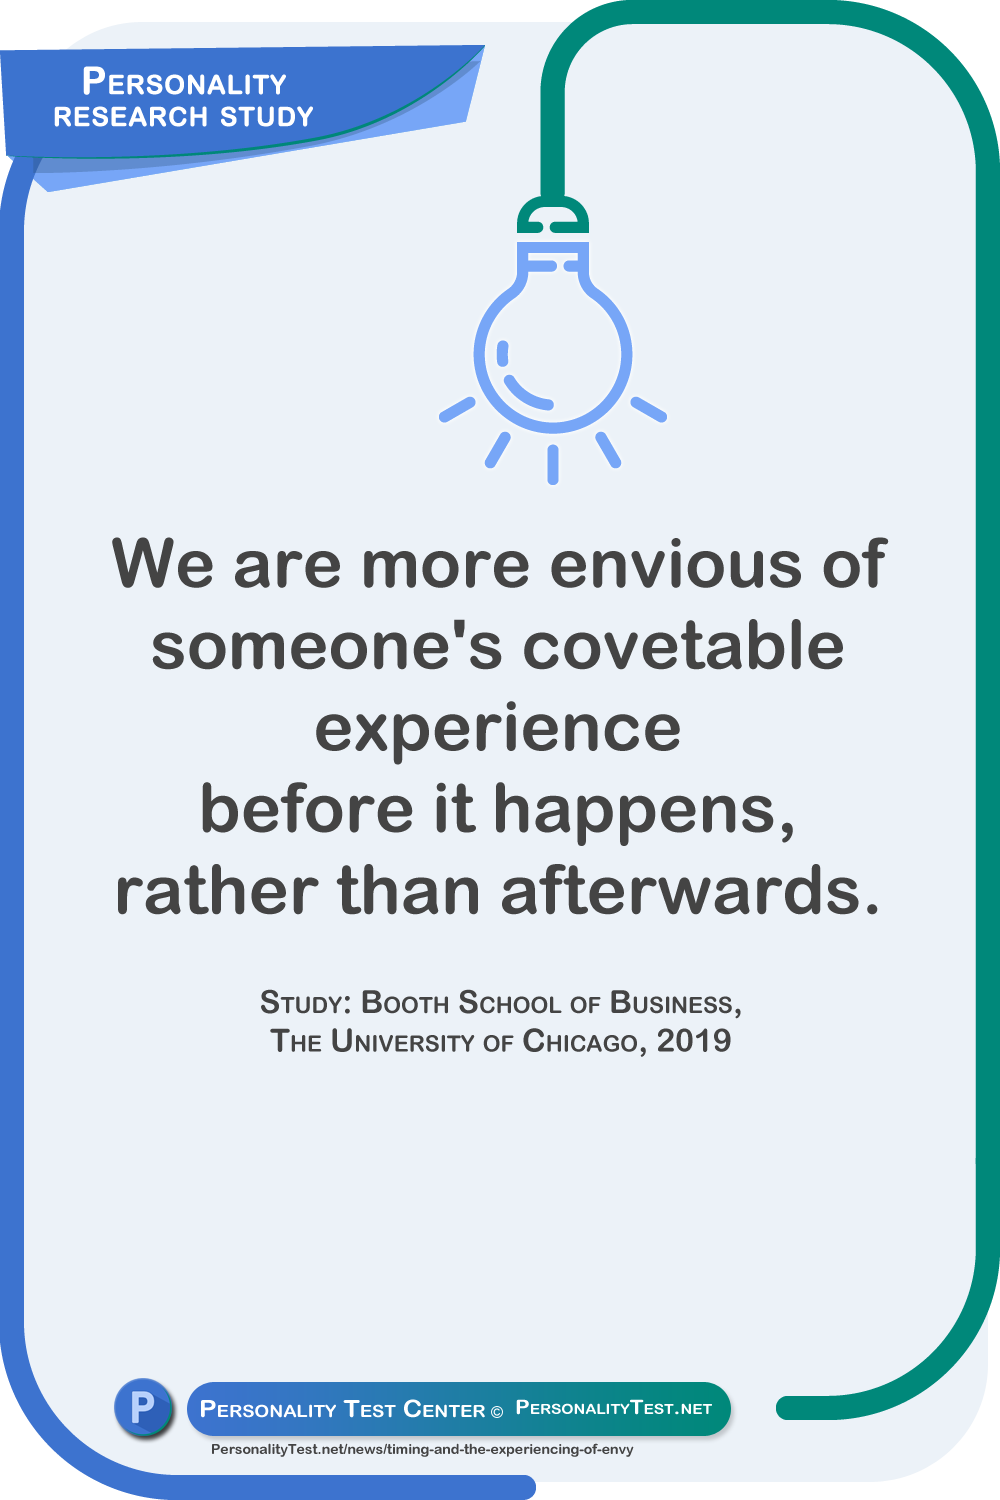 We are more envious of someone's covetable experience before it happens, rather than afterwards. Study: Booth School of Business, The University of Chicago, 2019